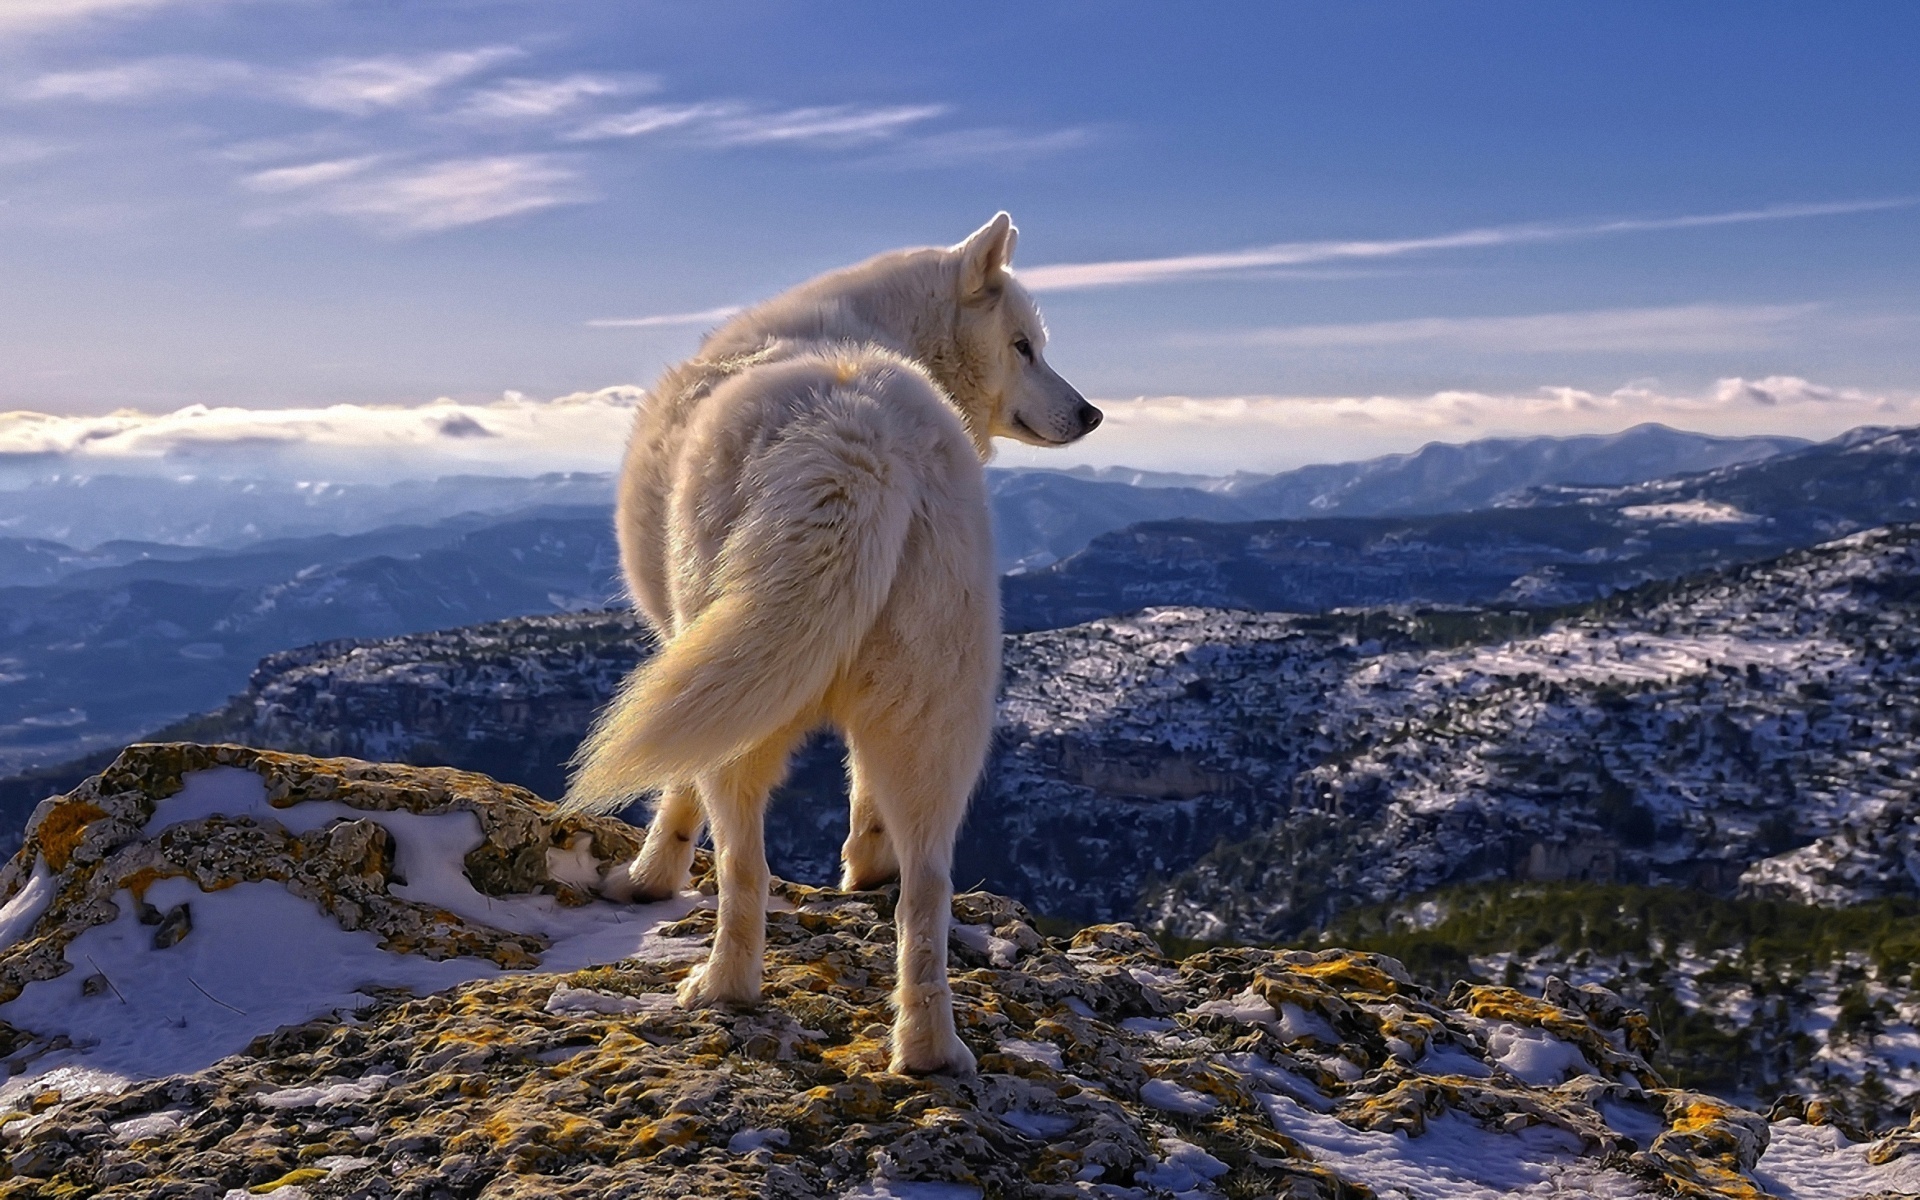 landscapes, Nature, Wolves, Mountains, Scenic, Cg, Manipulations, Digital art Wallpaper